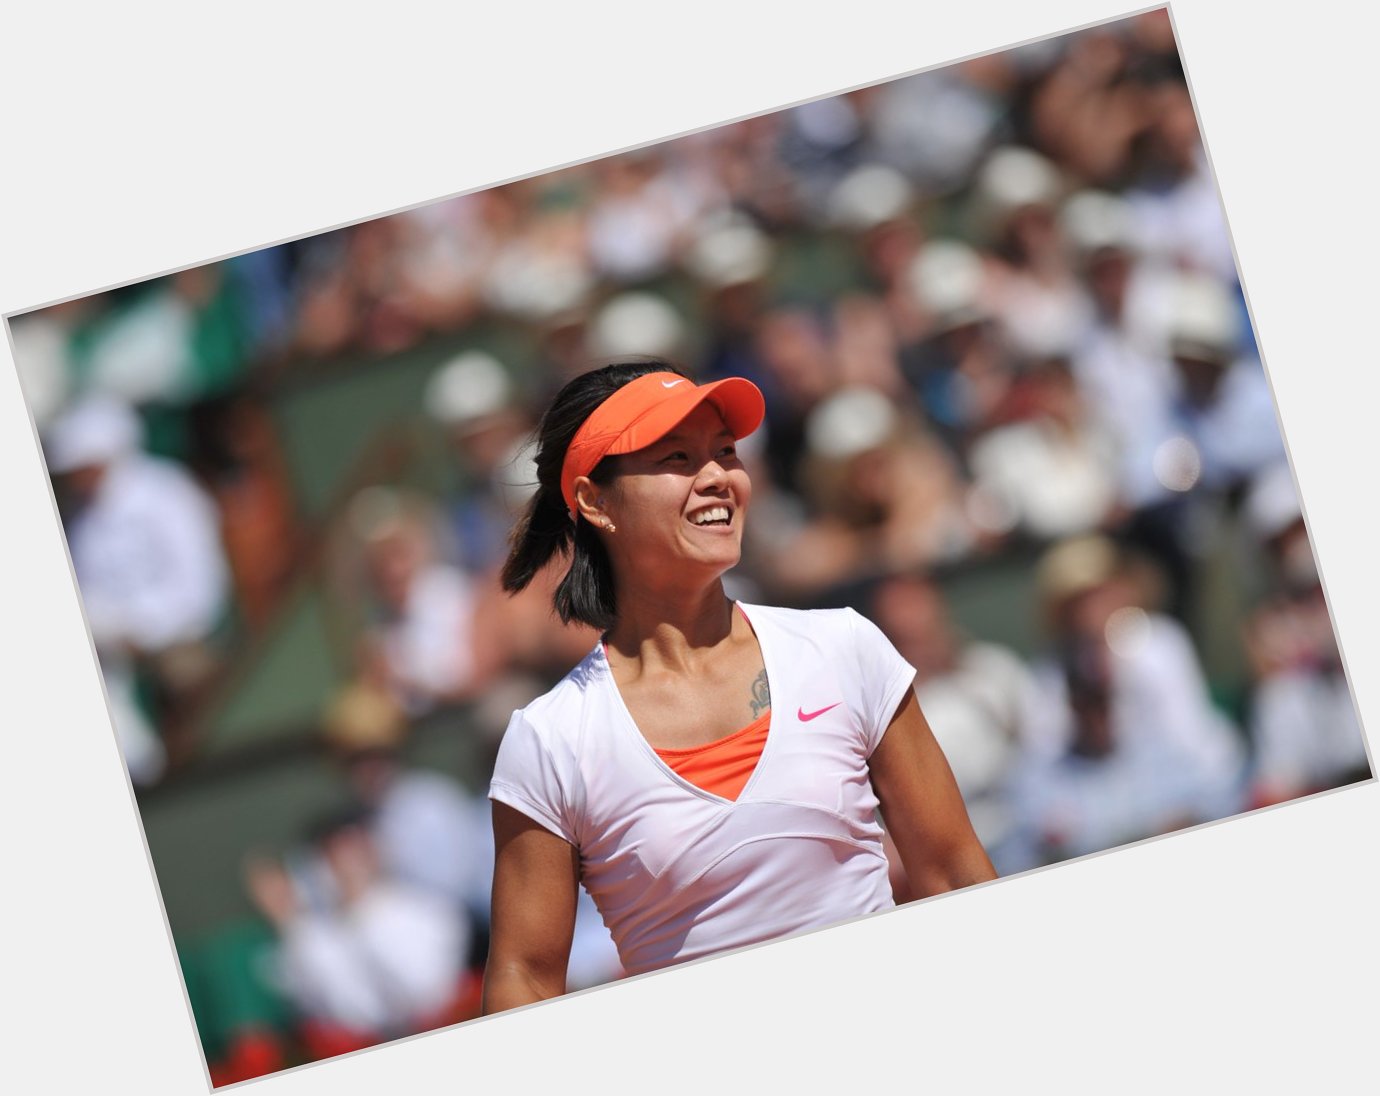 We re celebrating this 2019 Hall of Famer all year, and in an extra special way today. Happy Birthday Li Na! 